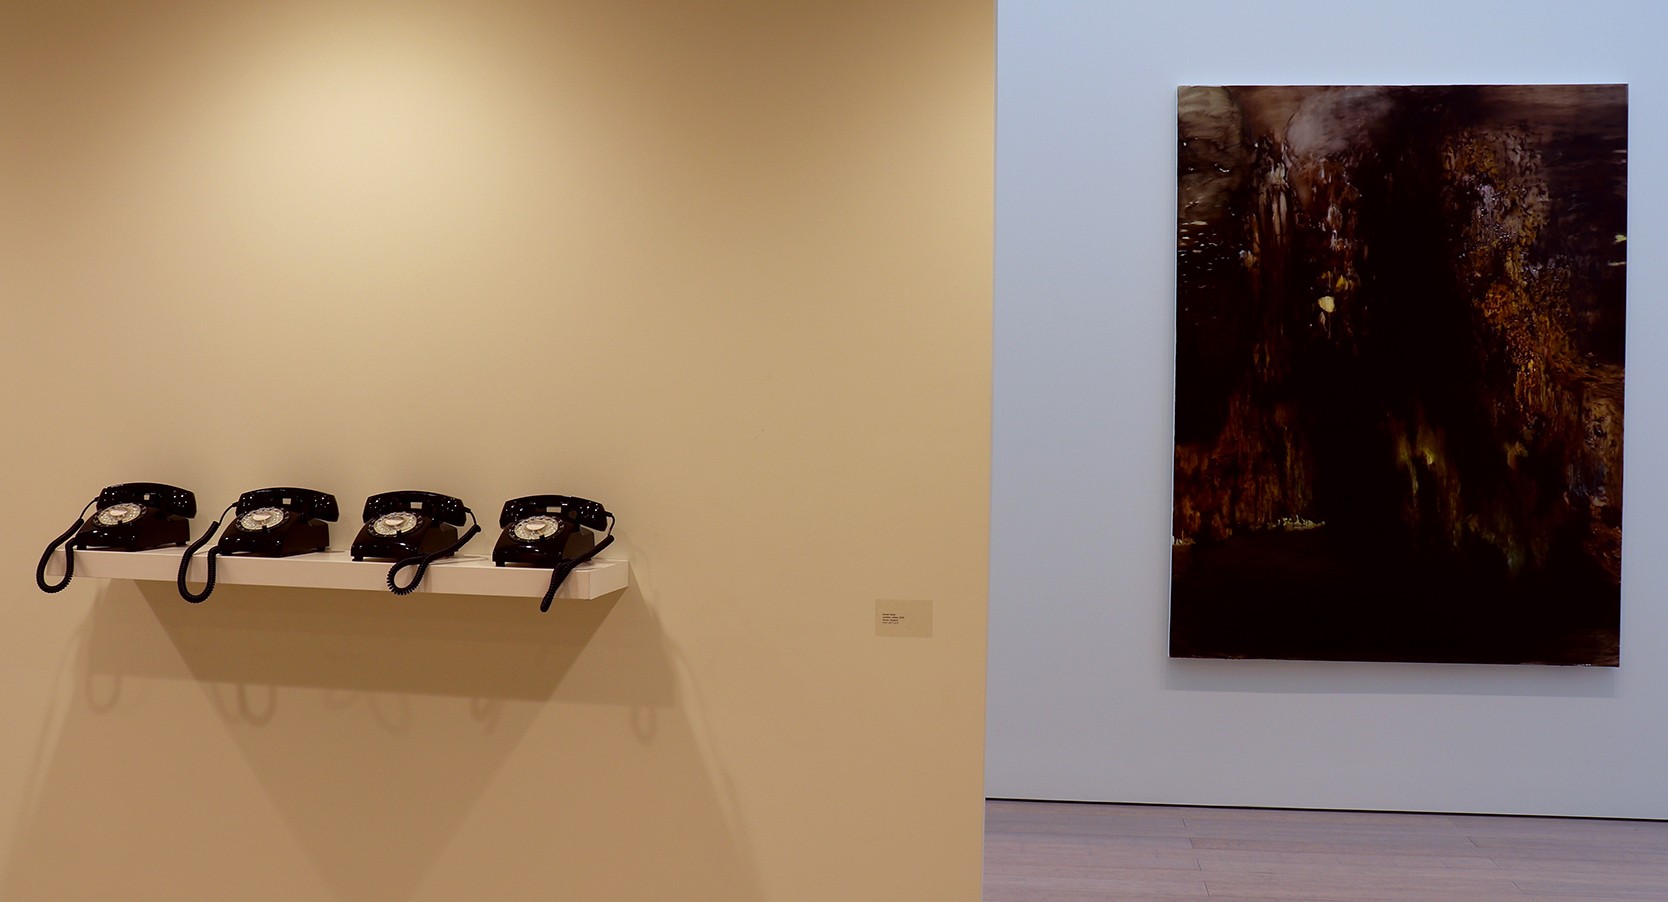 Installation view of the 6th floor 2019 MFA Thesis Exhibition, on view at the Wallach Art Gallery, Columbia University April 27 – May 26, 2019. Photograph by Eddie José Bartolomei. Courtesy the Wallach Art Gallery.